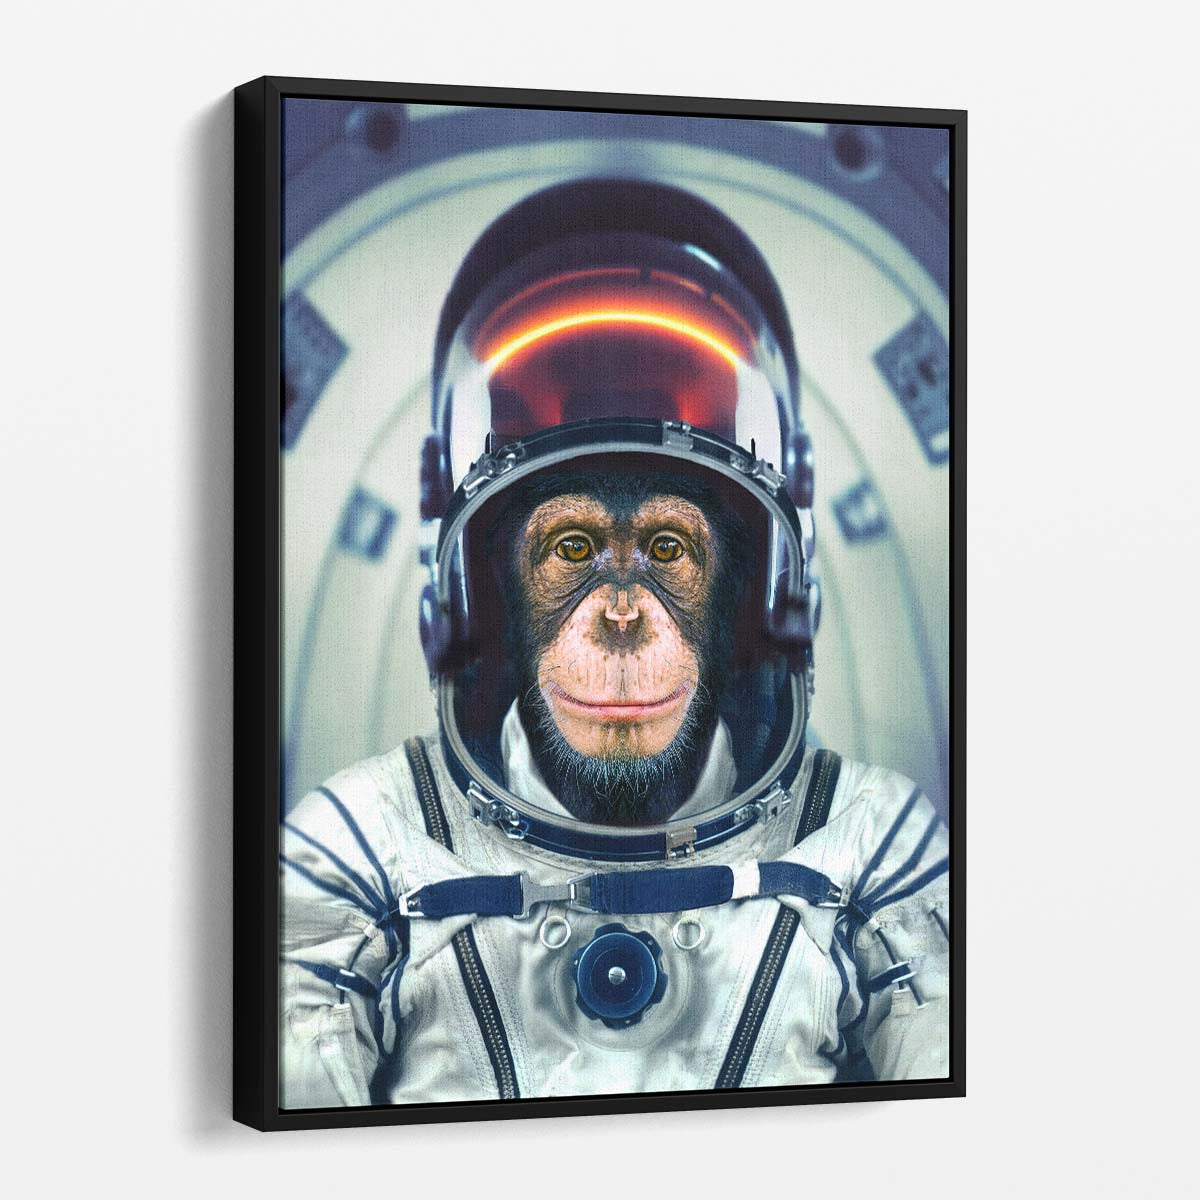 Fantasy Monkey Astronaut Photography by Marcel Egger - Creative Space Art by Luxuriance Designs, made in USA